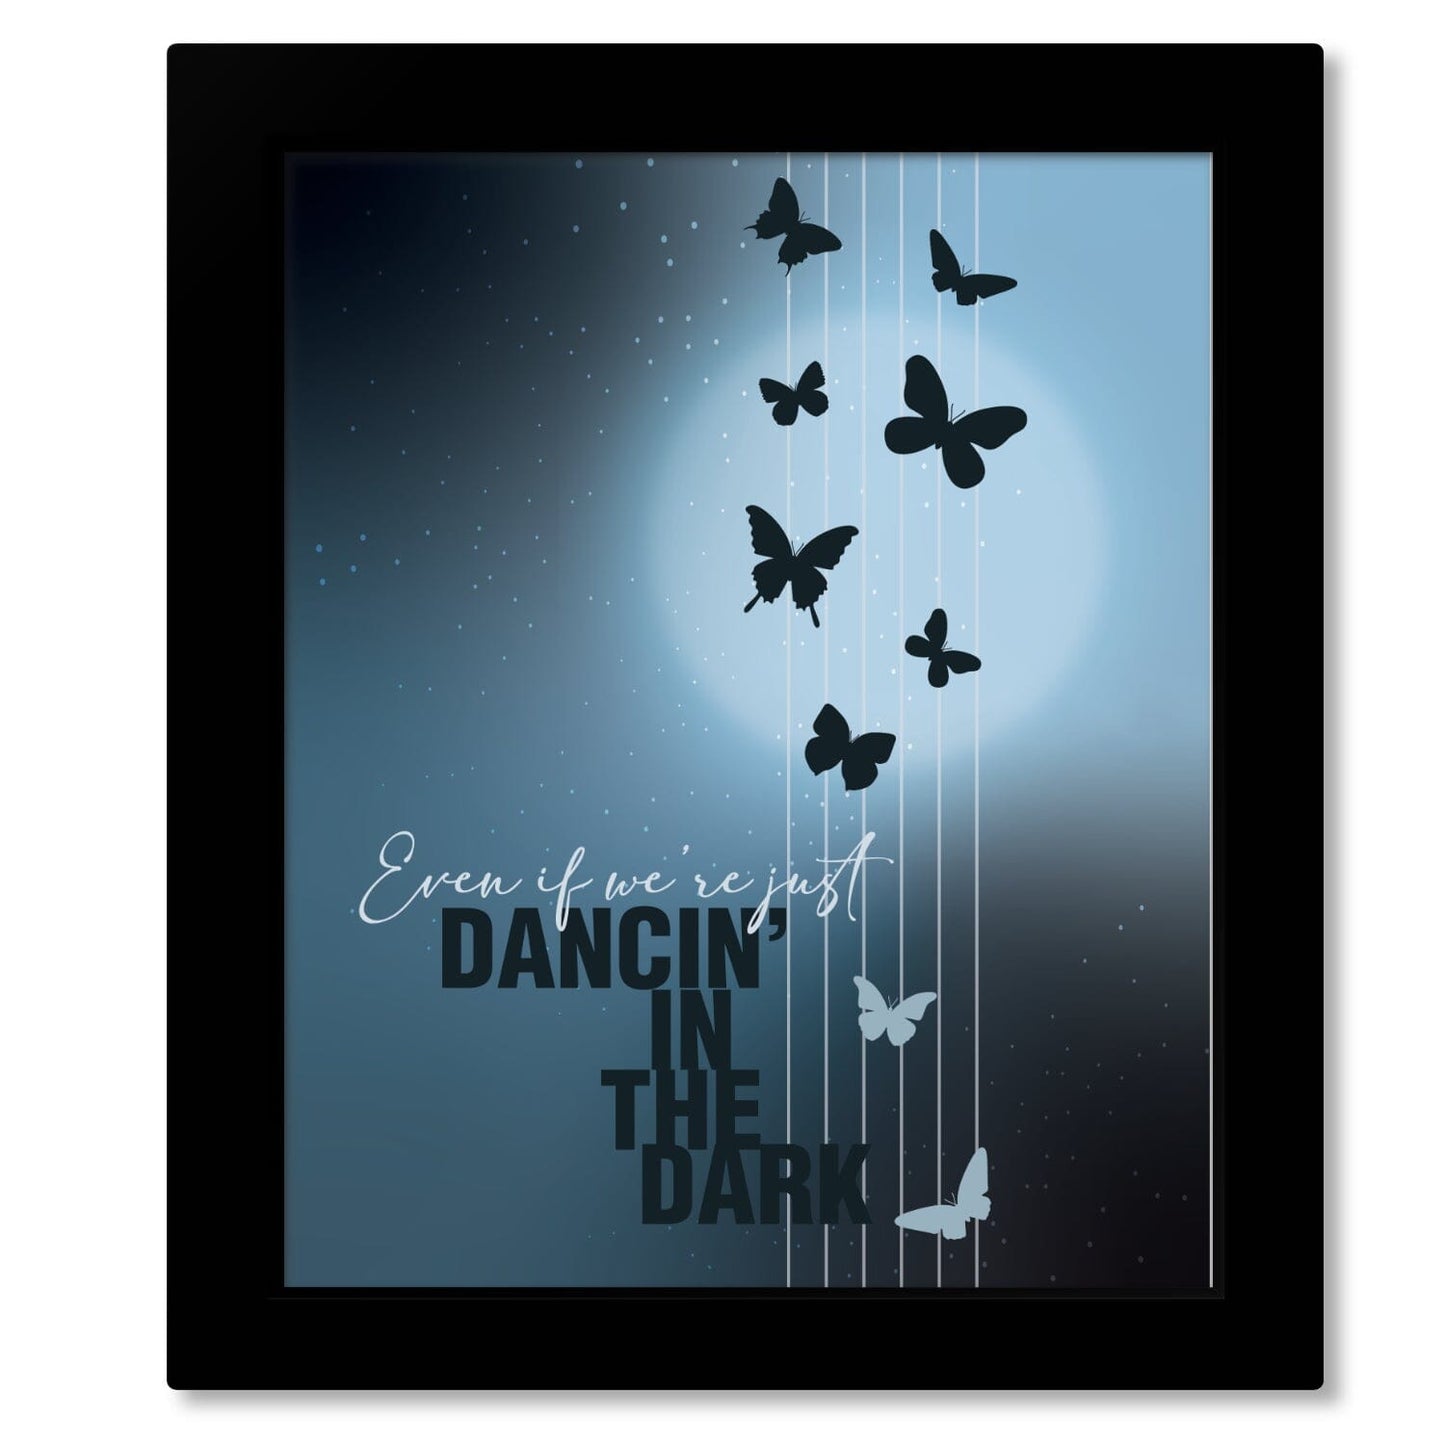 Dancin' in the Dark by Bruce Springsteen - Rock Music Art Song Lyrics Art Song Lyrics Art 8x10 Framed Print (without Mat) 